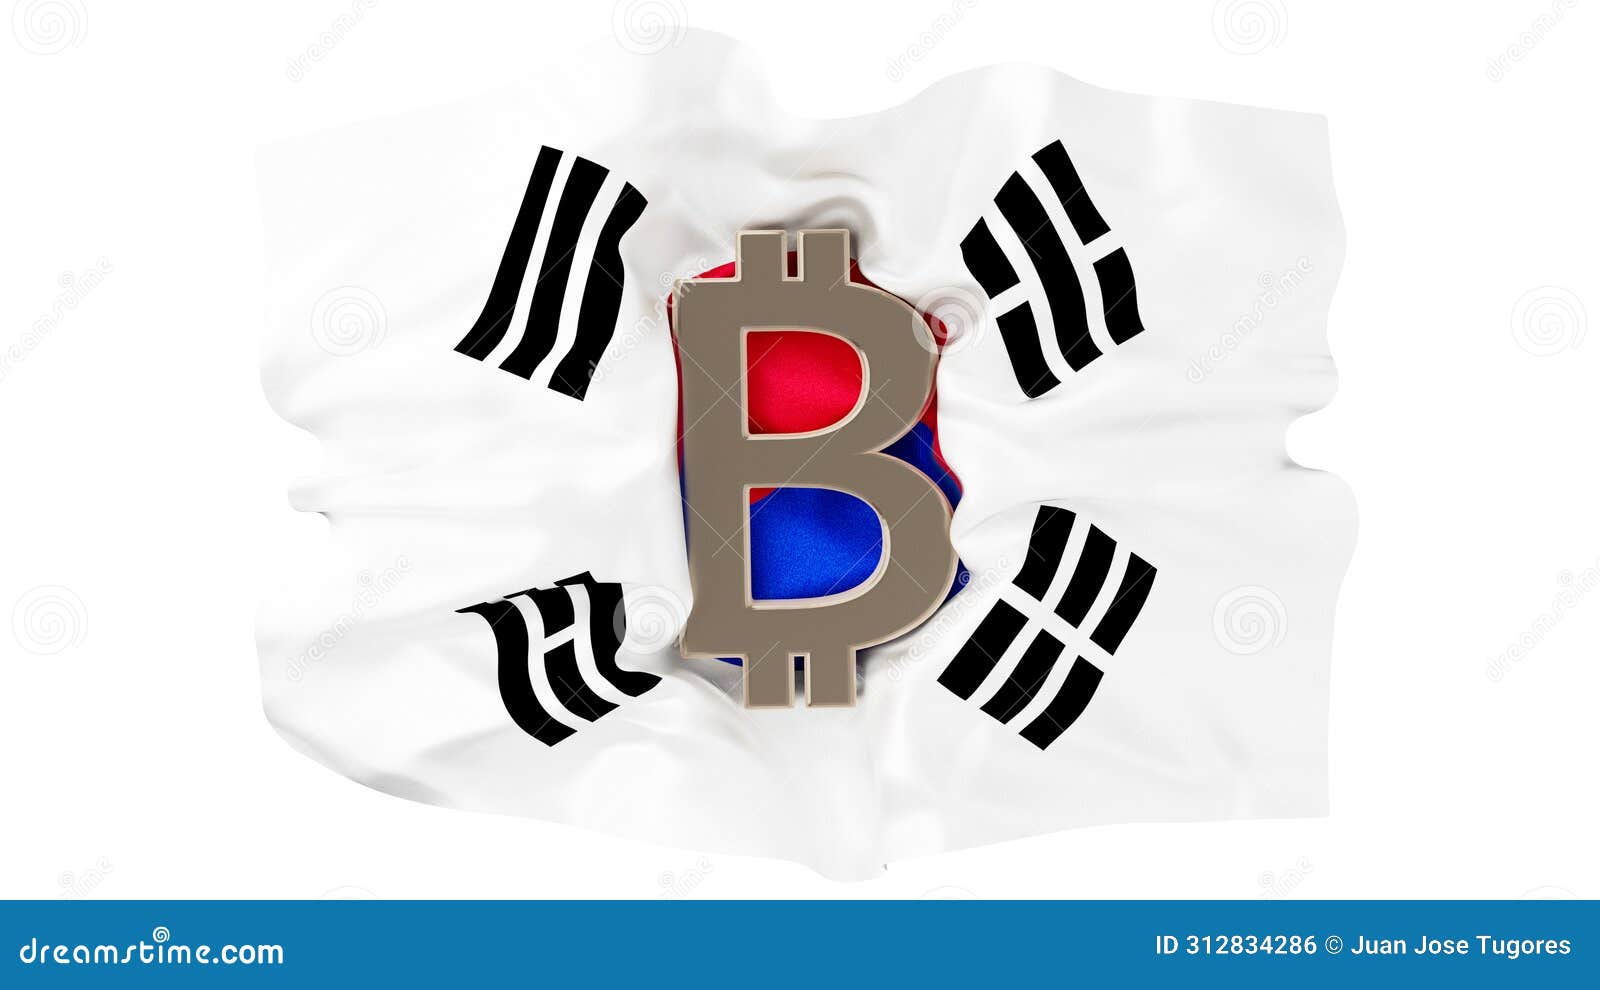 bitcoin merges with south korean flag - a fusion of fintech and tradition